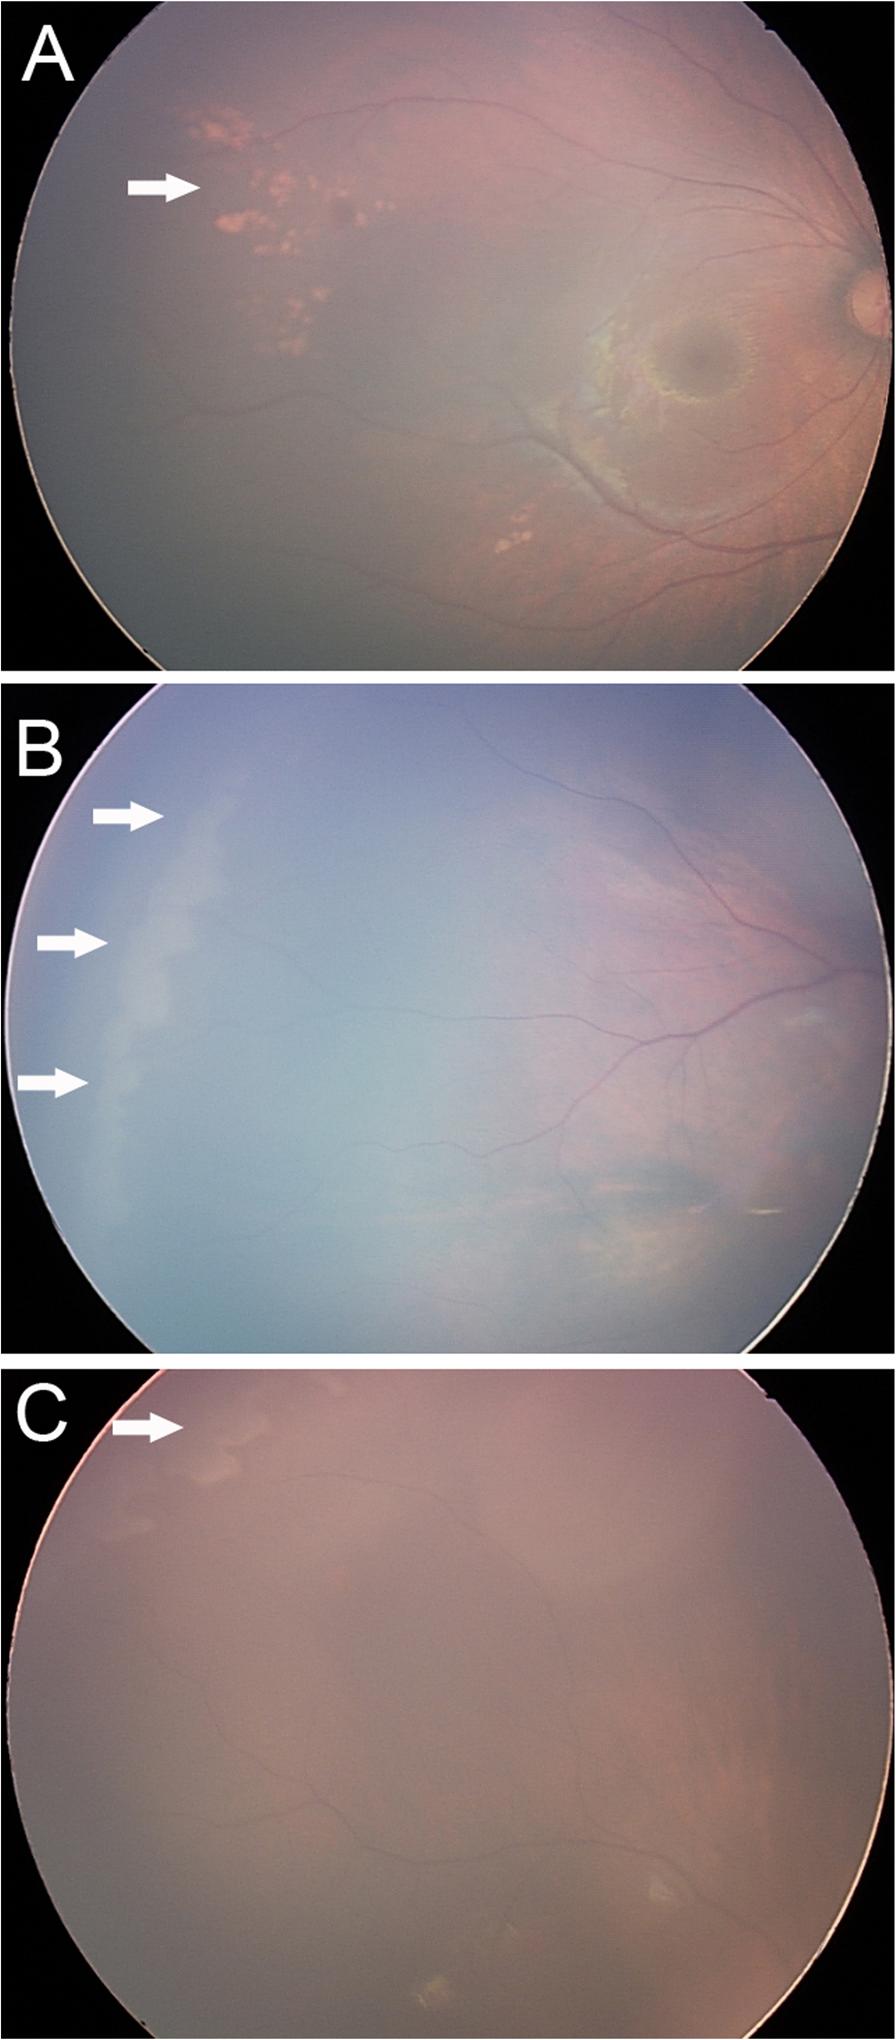 Ma et al. BMC Ophthalmology (2018) 18:283 Page 3 of 8 Fig. 2 Concomitant exotropia was seen in 3.